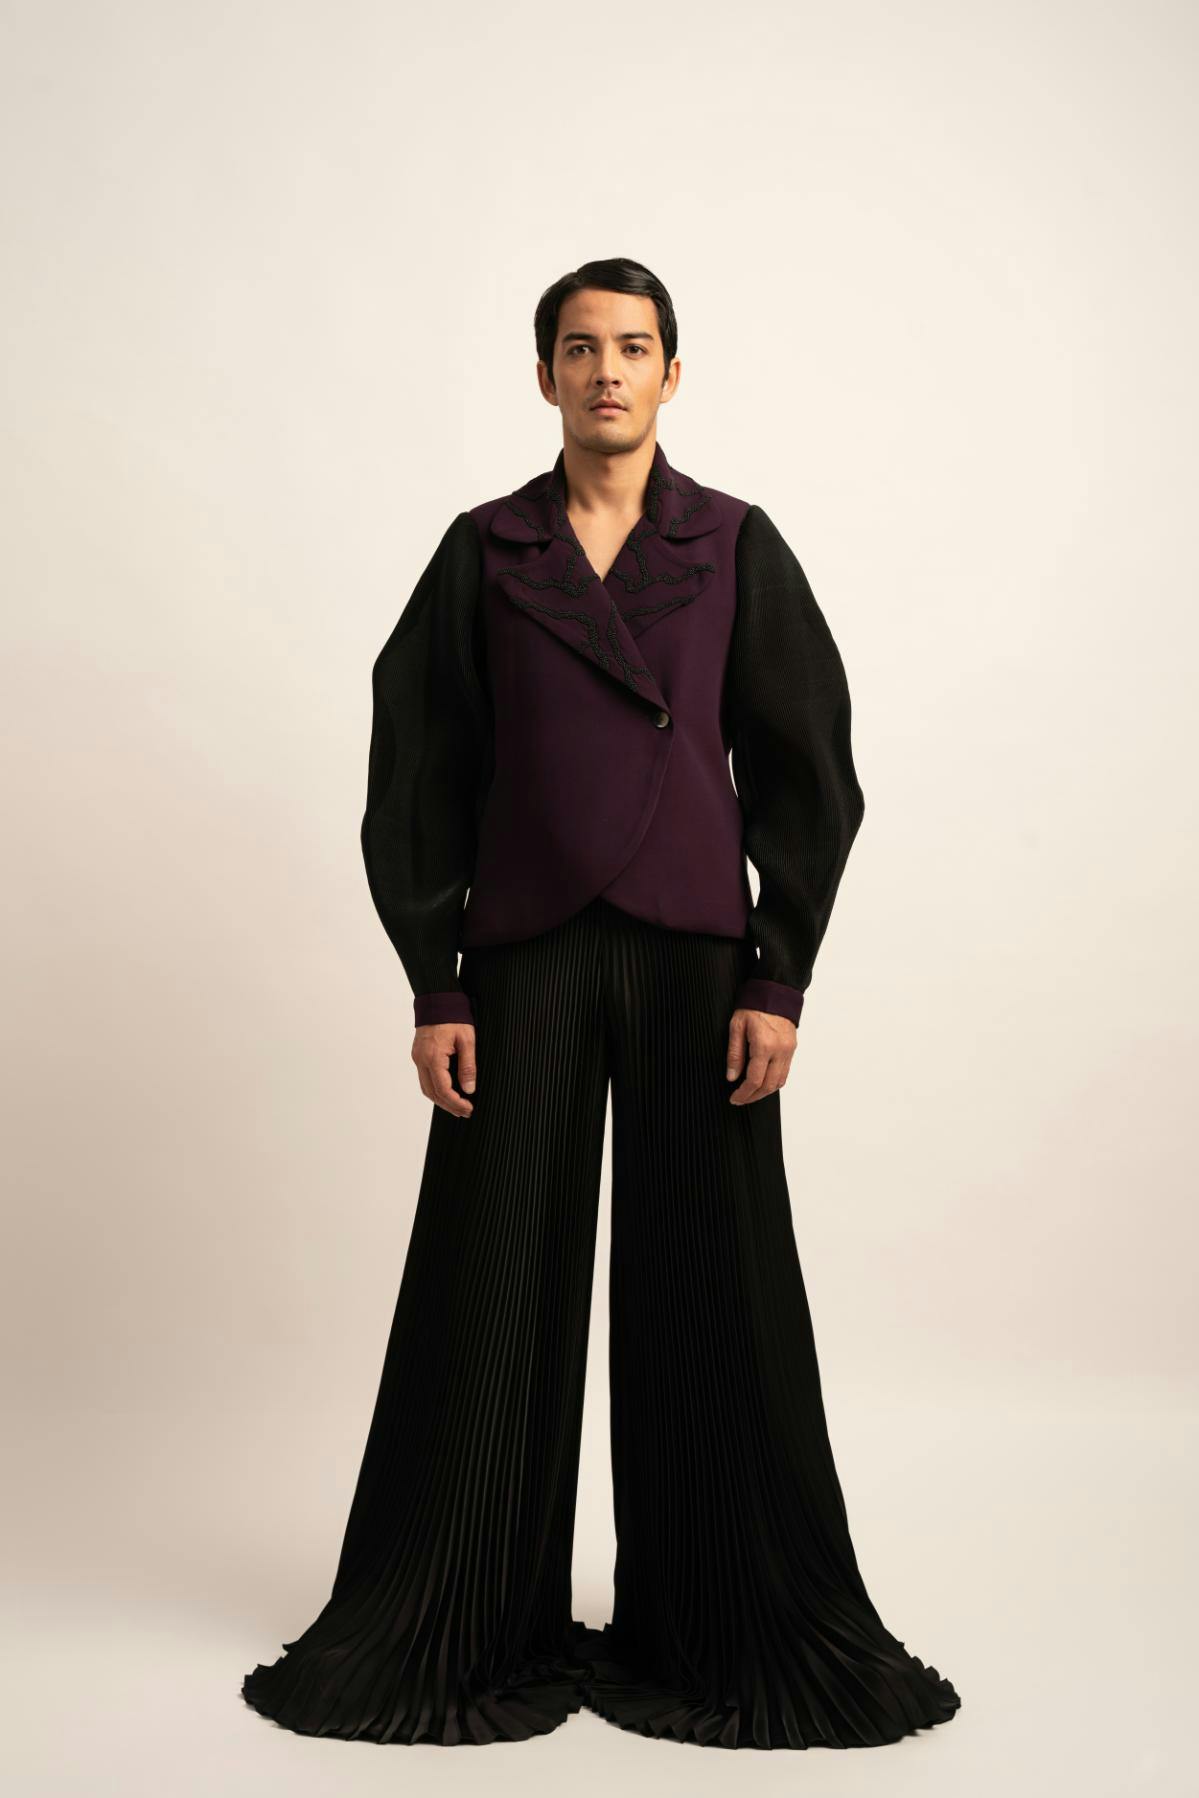 The Vanguard Trousers, a product by Siddhant Agrawal Label